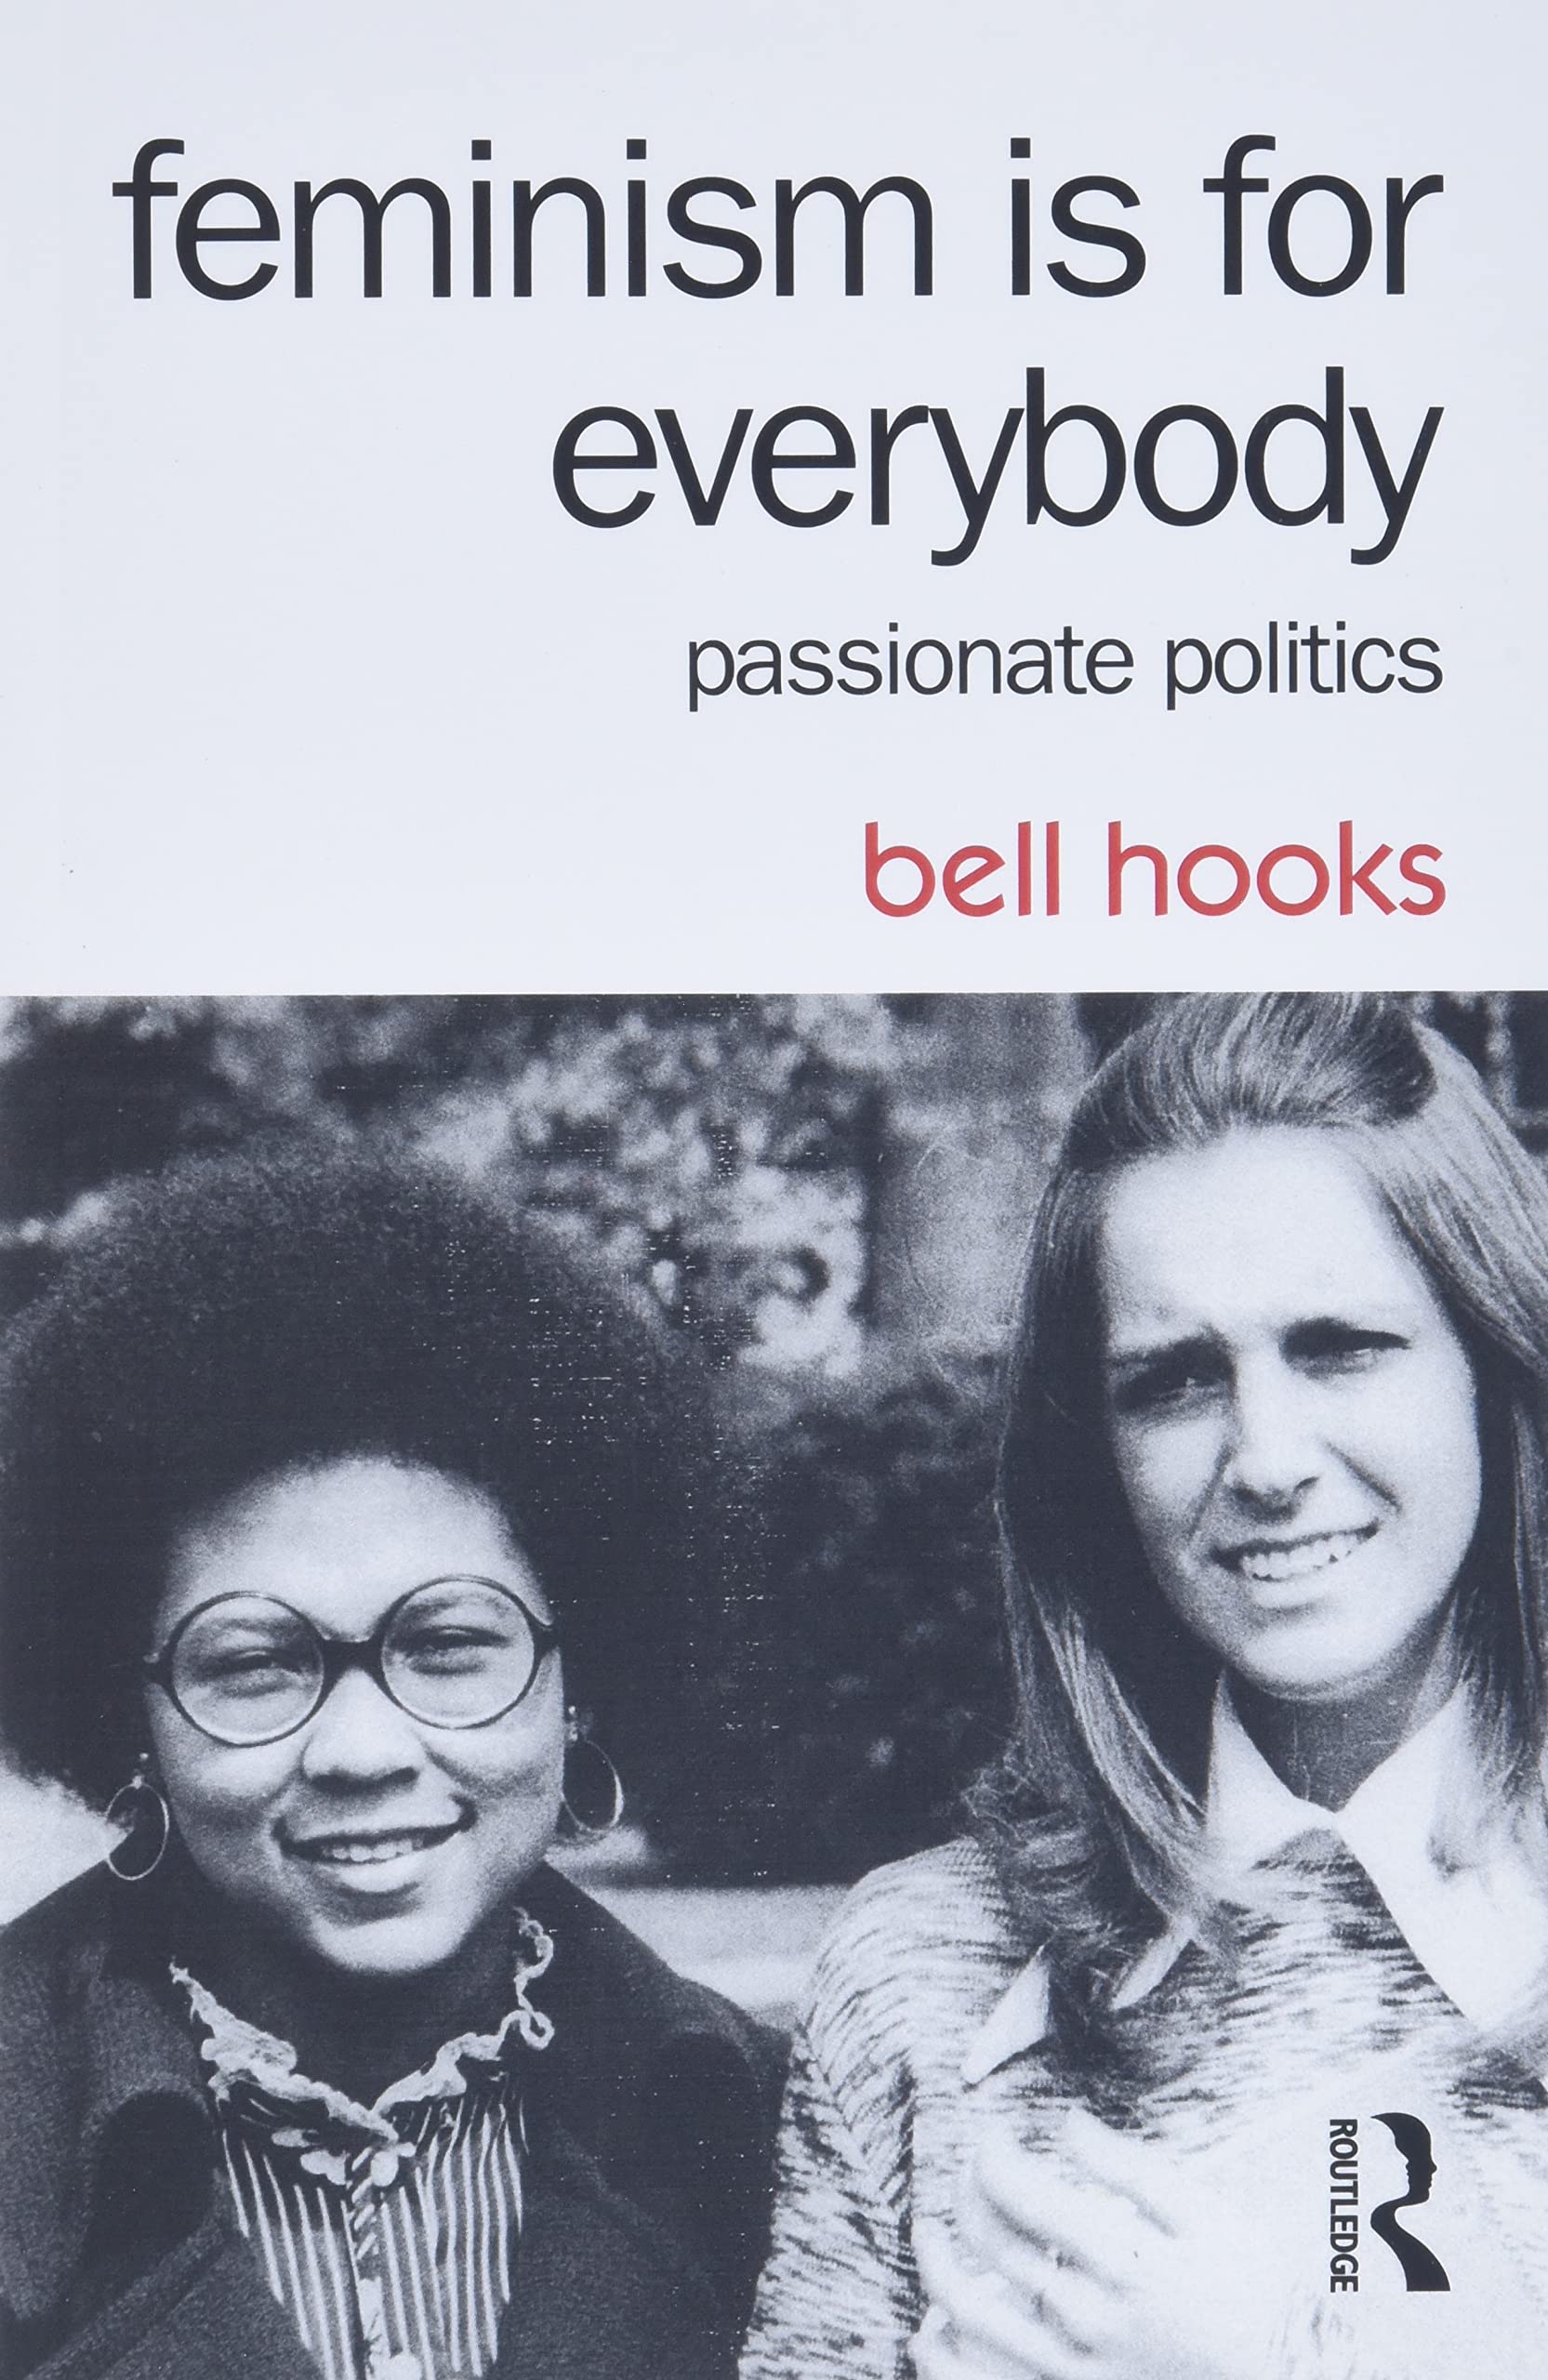 Cover Photo of the book Feminism is for Everybody - Bell Hooks